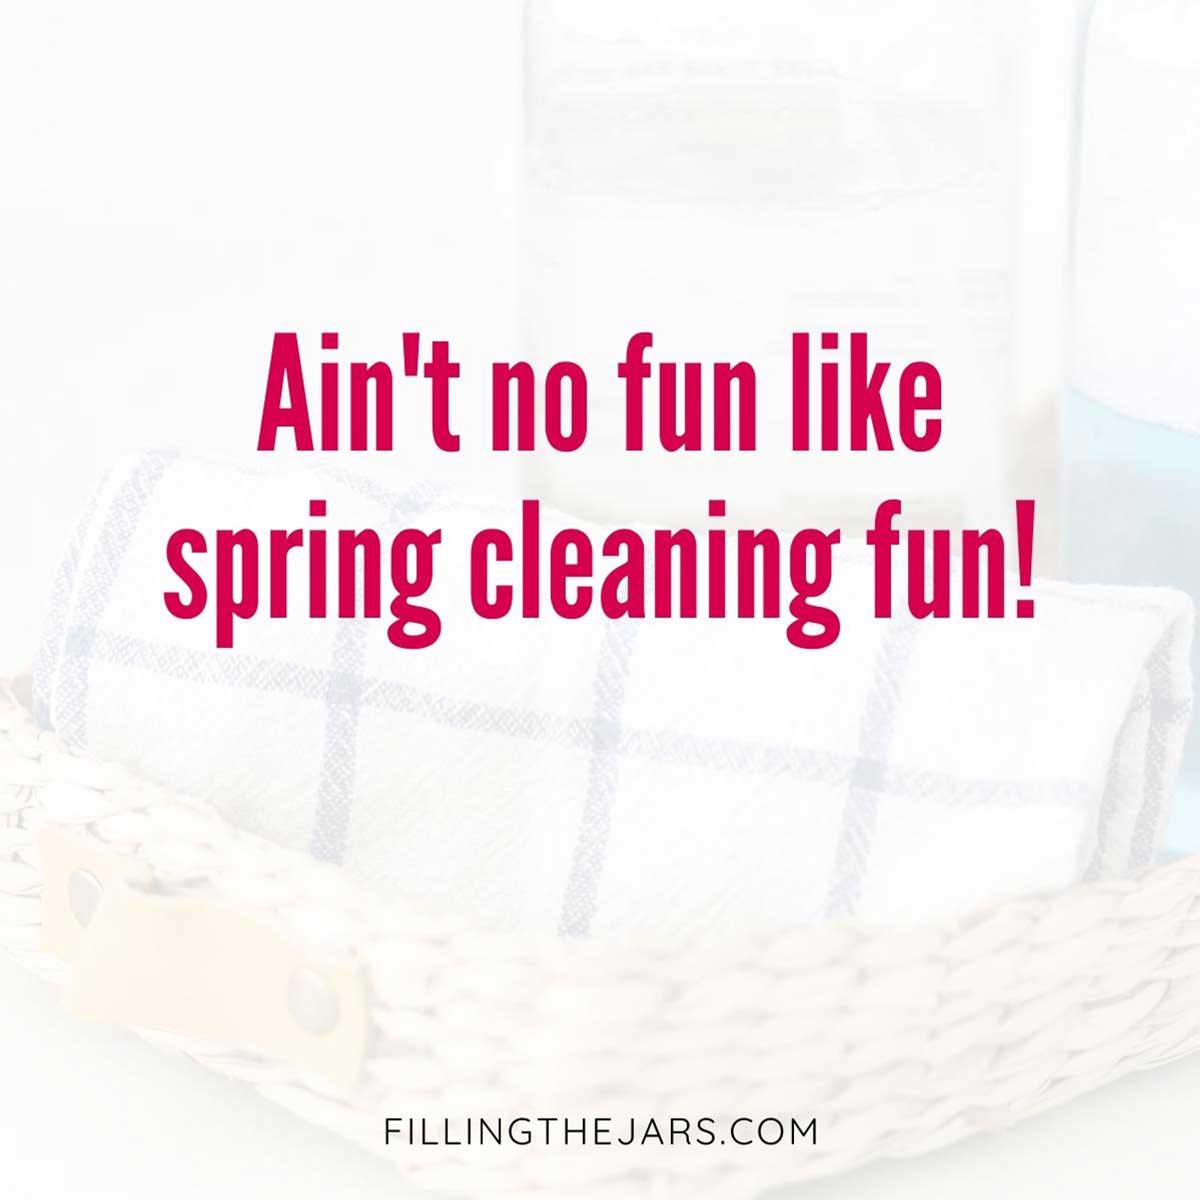 No fun like spring cleaning quote in pink text on light background.